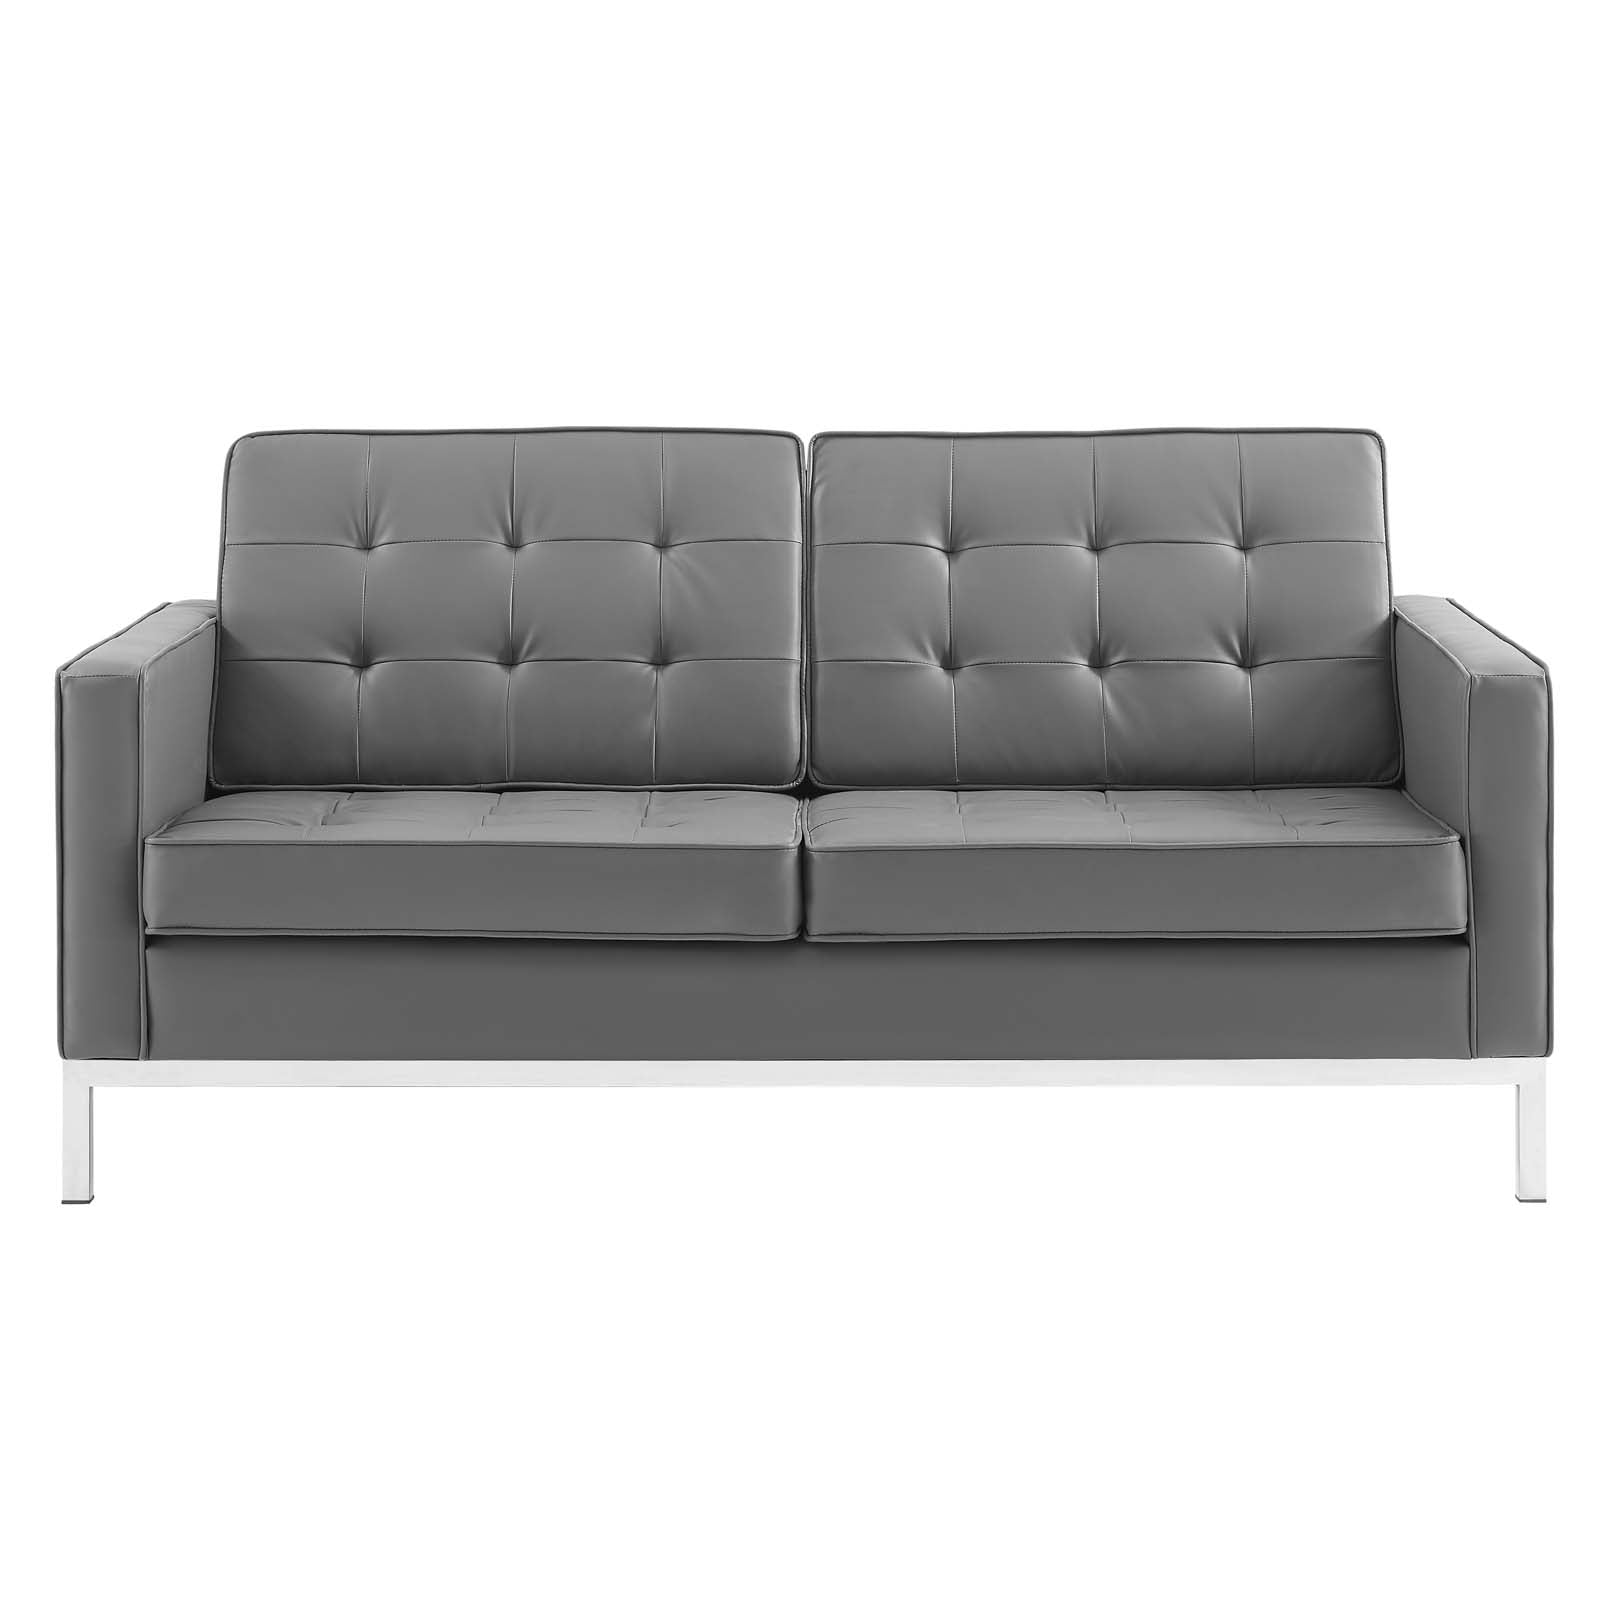 Loft Tufted Upholstered Faux Leather Loveseat - East Shore Modern Home Furnishings